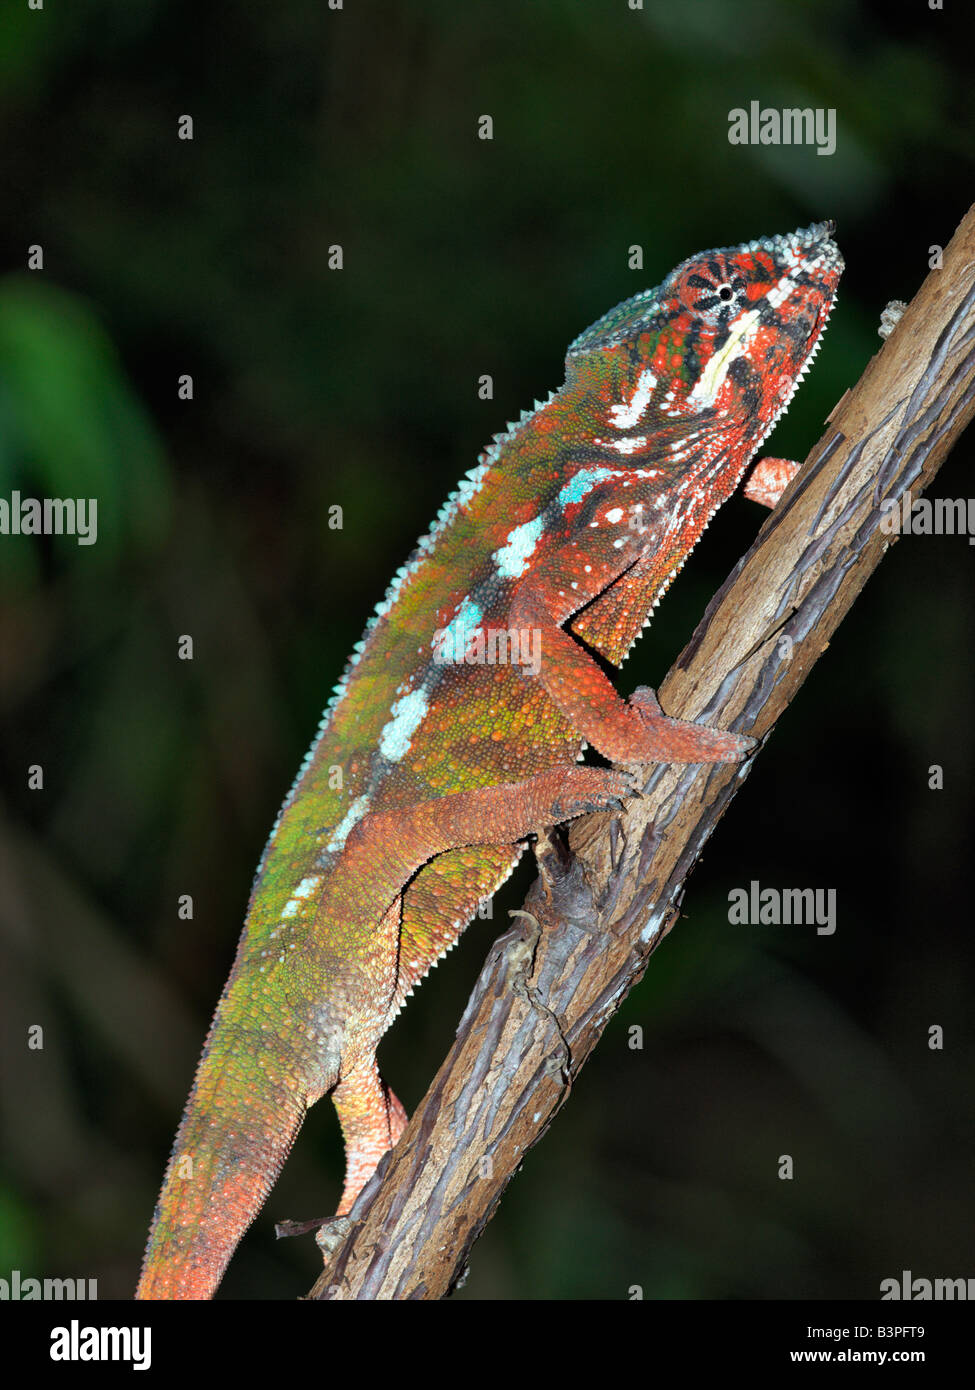 Eastern Madagascar, Mandraka. A colourful furcifer sp. chameleon. Madagascar is synonymous with these magnificent old world reptiles. Two-thirds of all known species are native to the island, the fourth largest in the world. A chameleon's ability to change colour and swivel its eyes 180 degrees makes it a reptile of considerable fascination.Malagasy people will only point to a chameleon with a knuckle. If they inadvertently use an outstretched finger, they must blow on it afterwards. Stock Photo